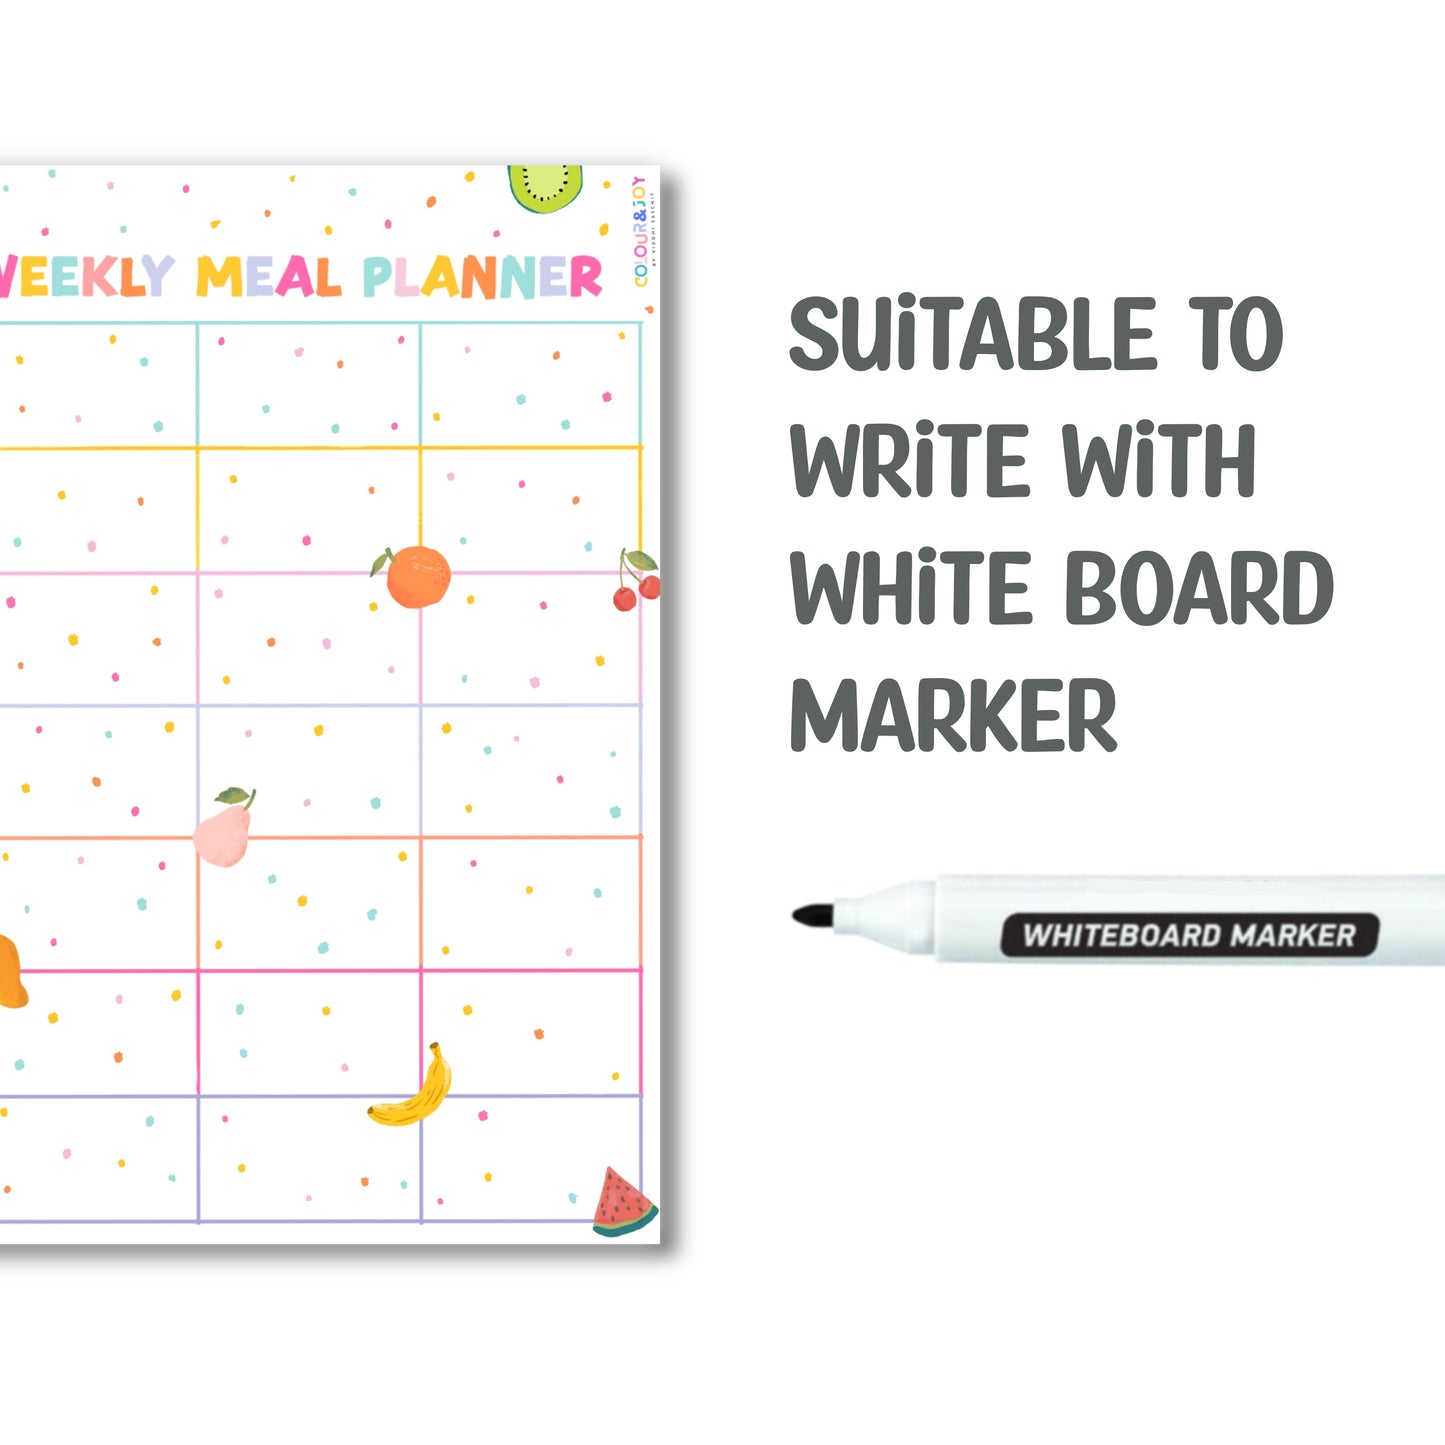 Weekly Meal Planner (2) - A4 (8.3"x11.7")